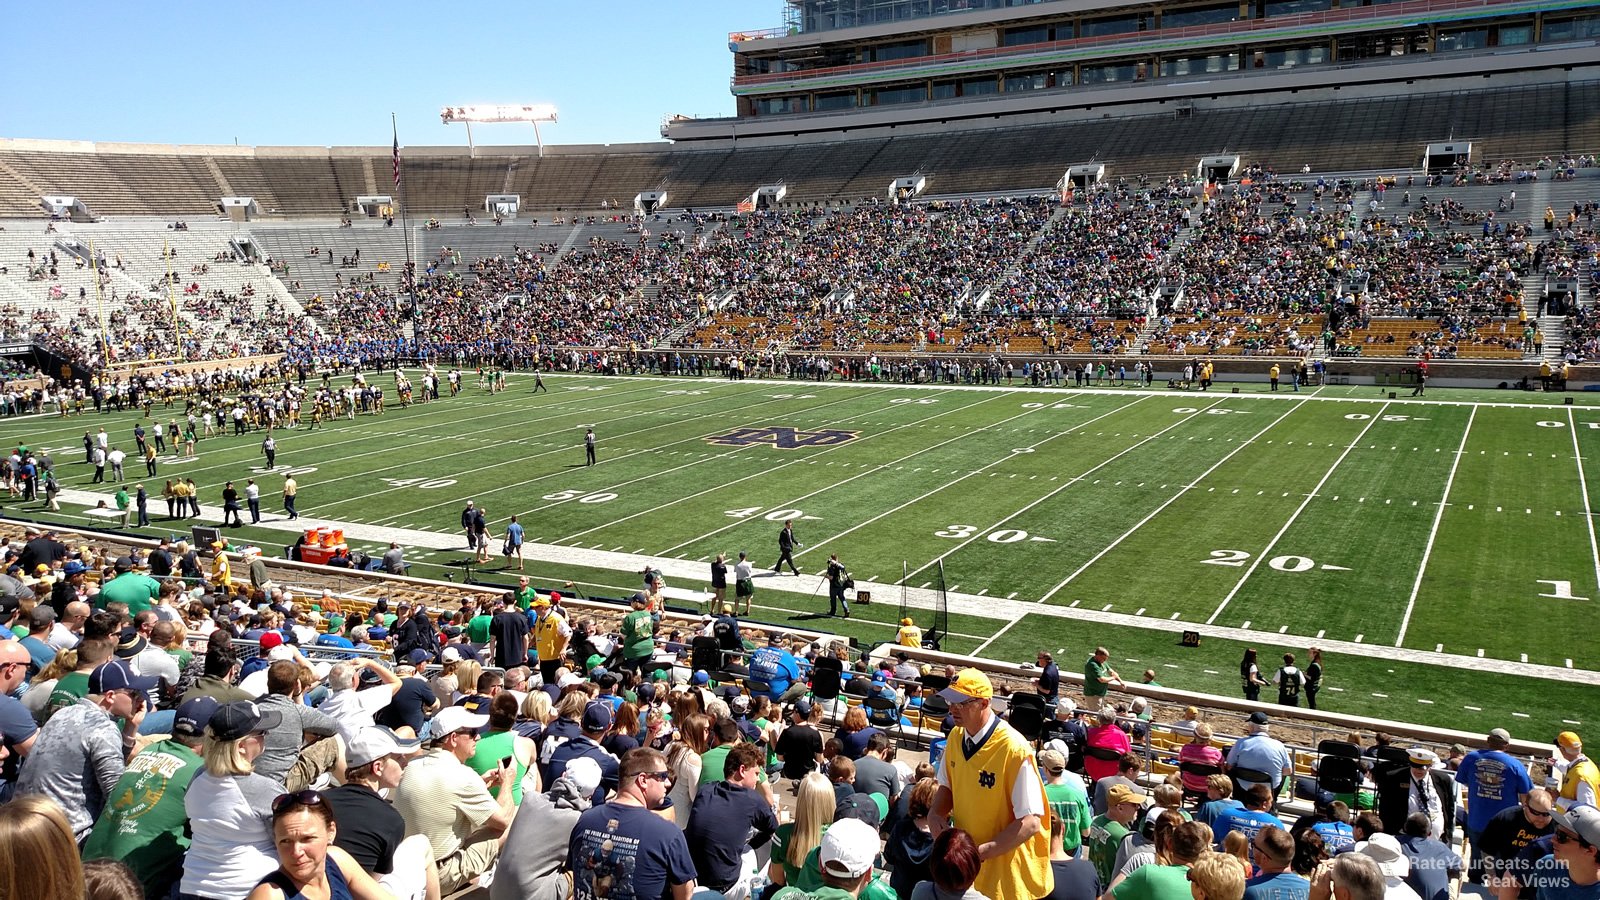 section 25, row 36 seat view  - notre dame stadium